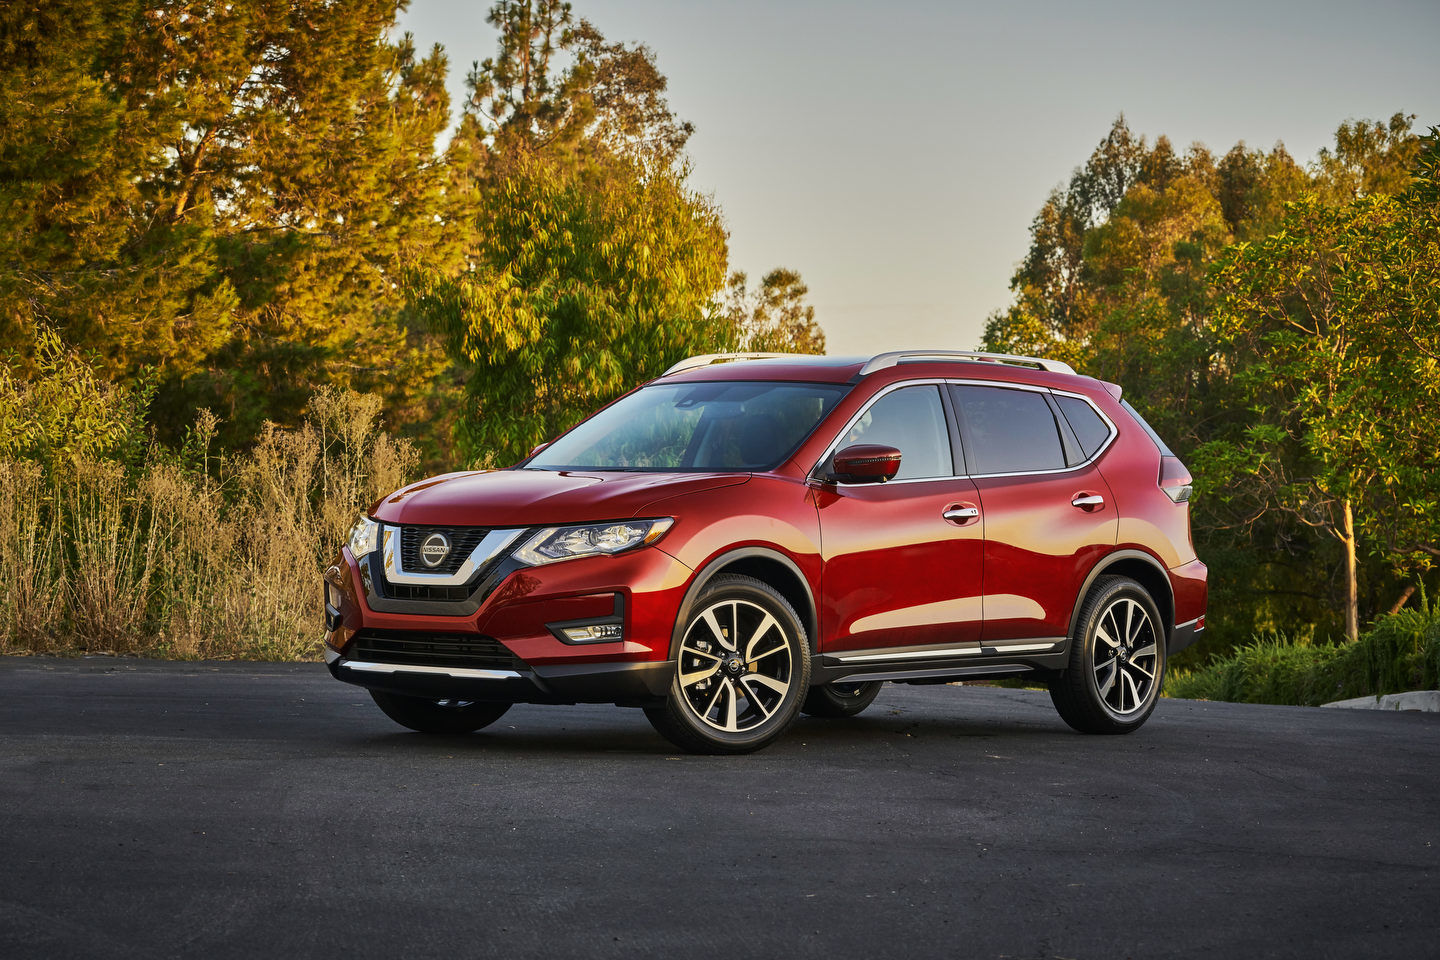 Why Nissan's Certified Pre-Owned Program is a Smart Choice: 3 Benefits